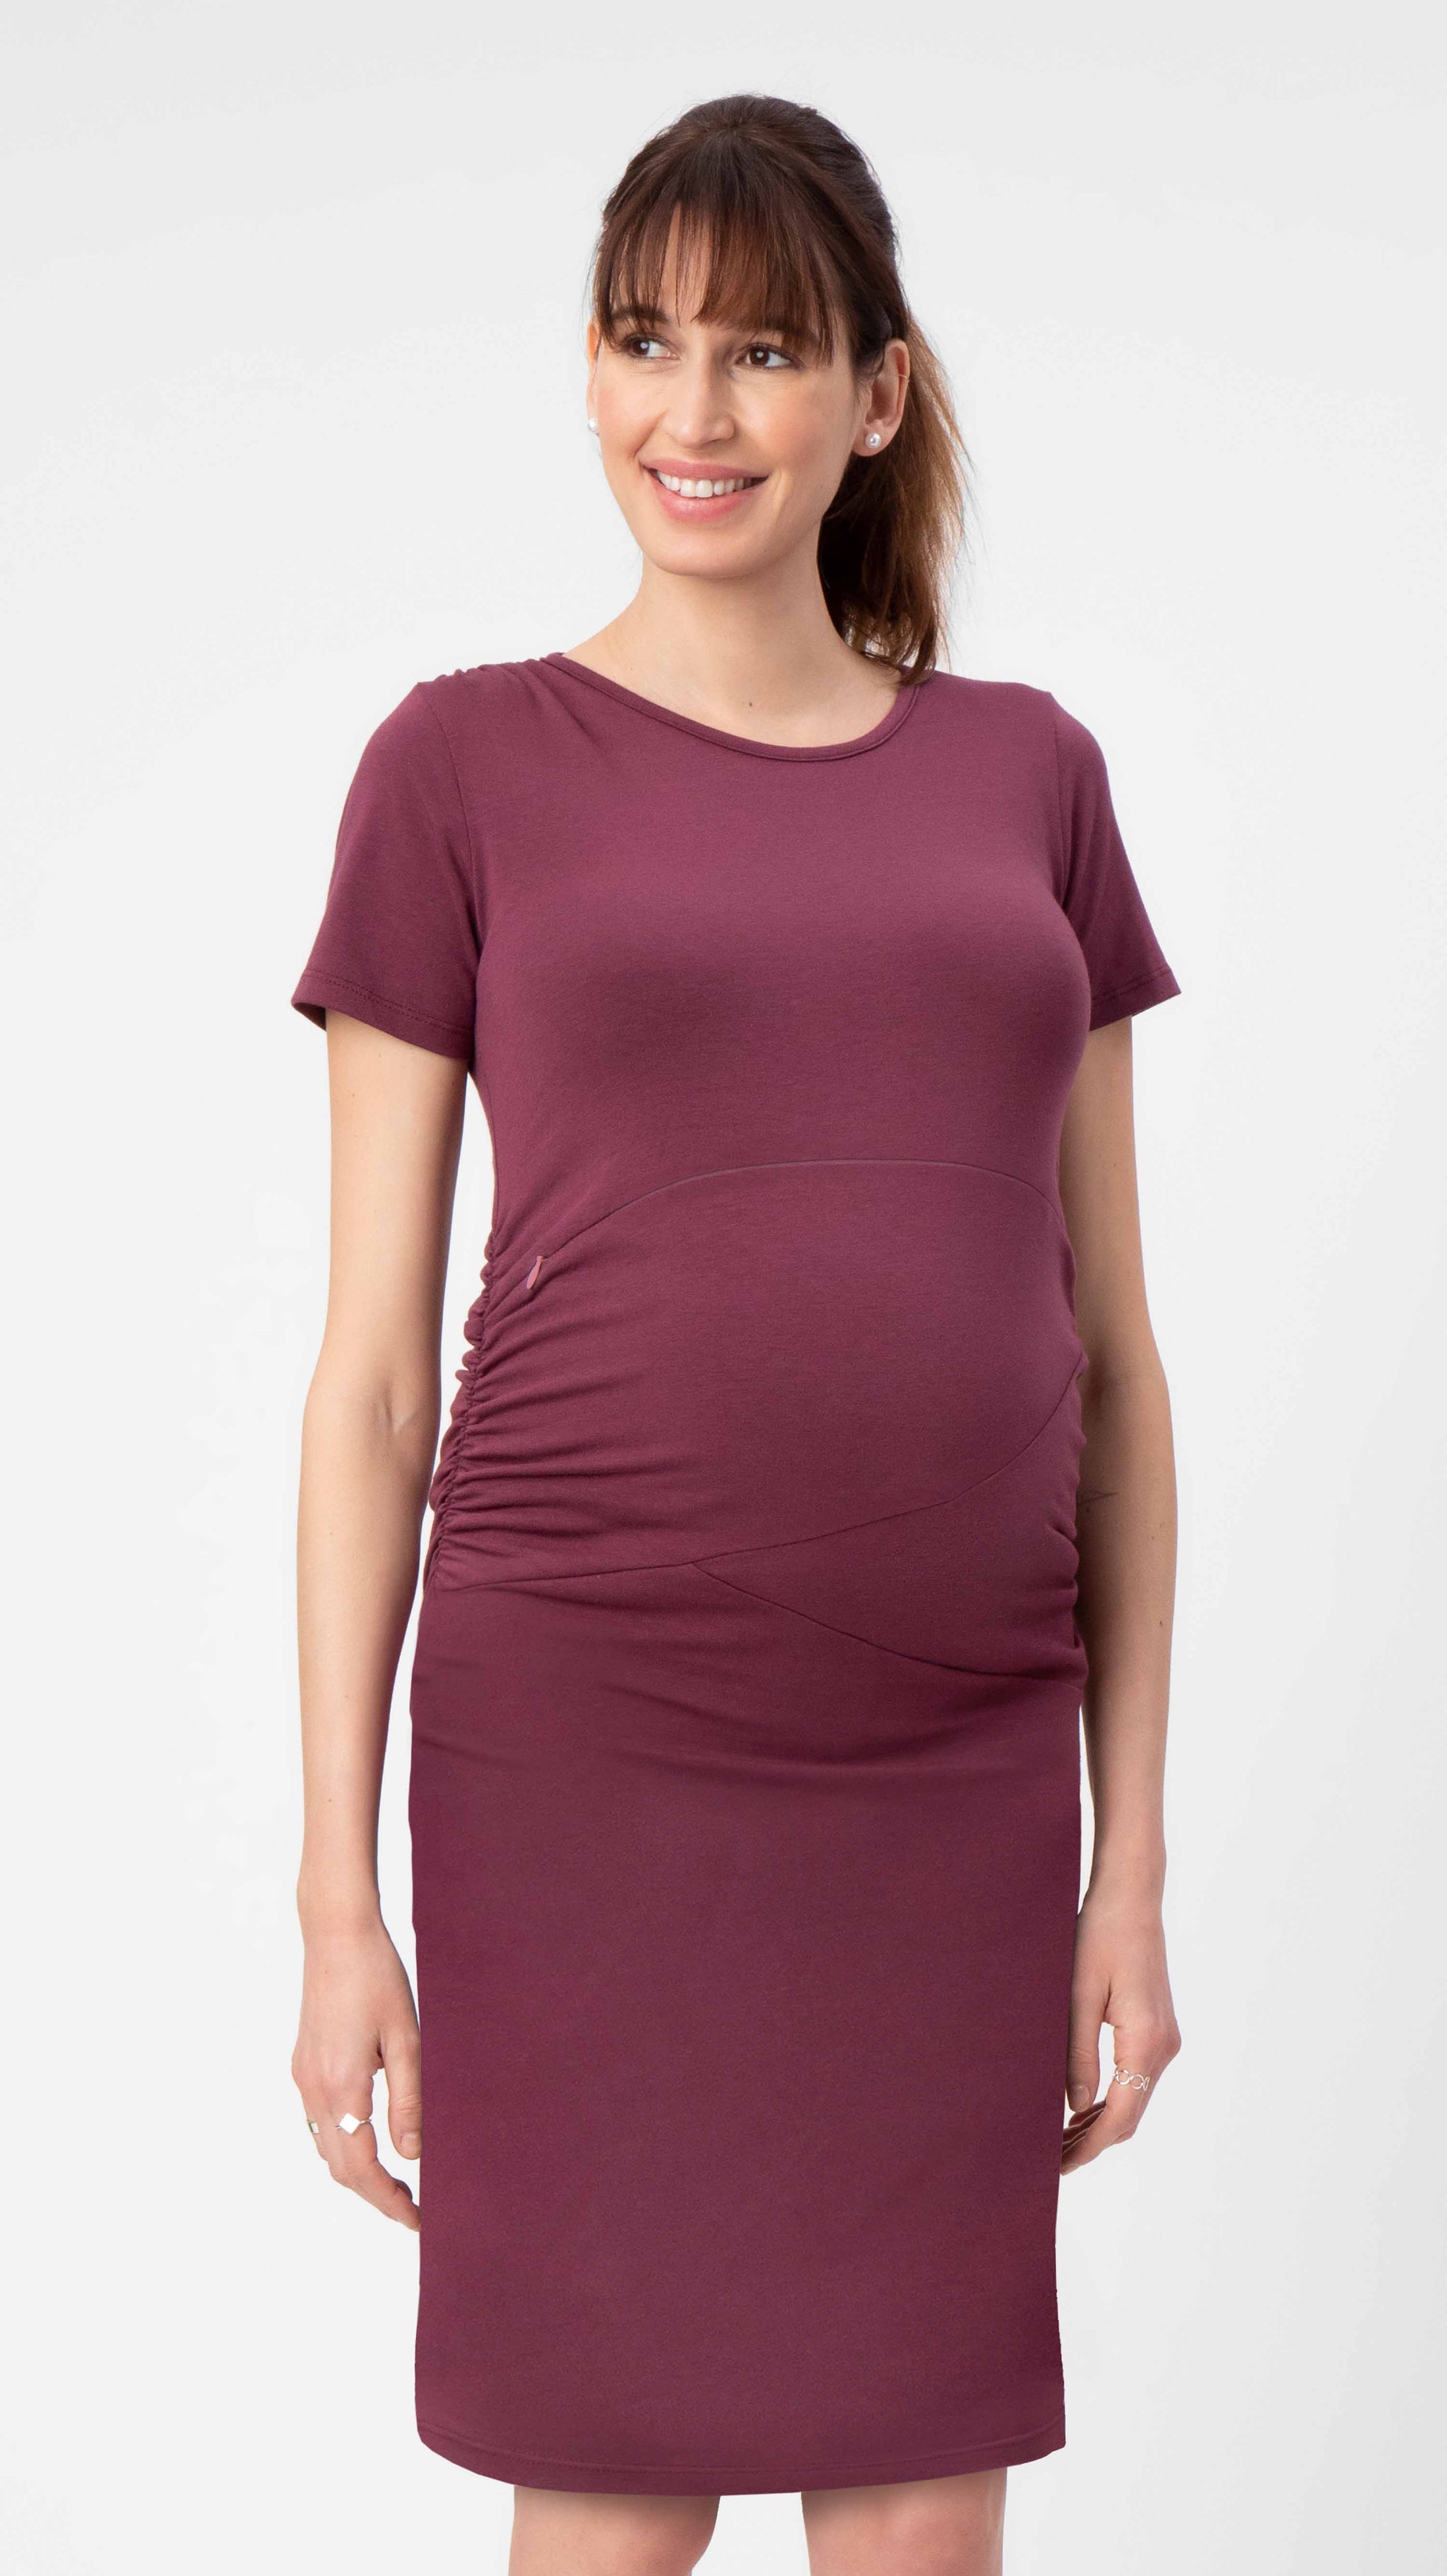 Shop All Maternity Clothes - Stowaway Collection